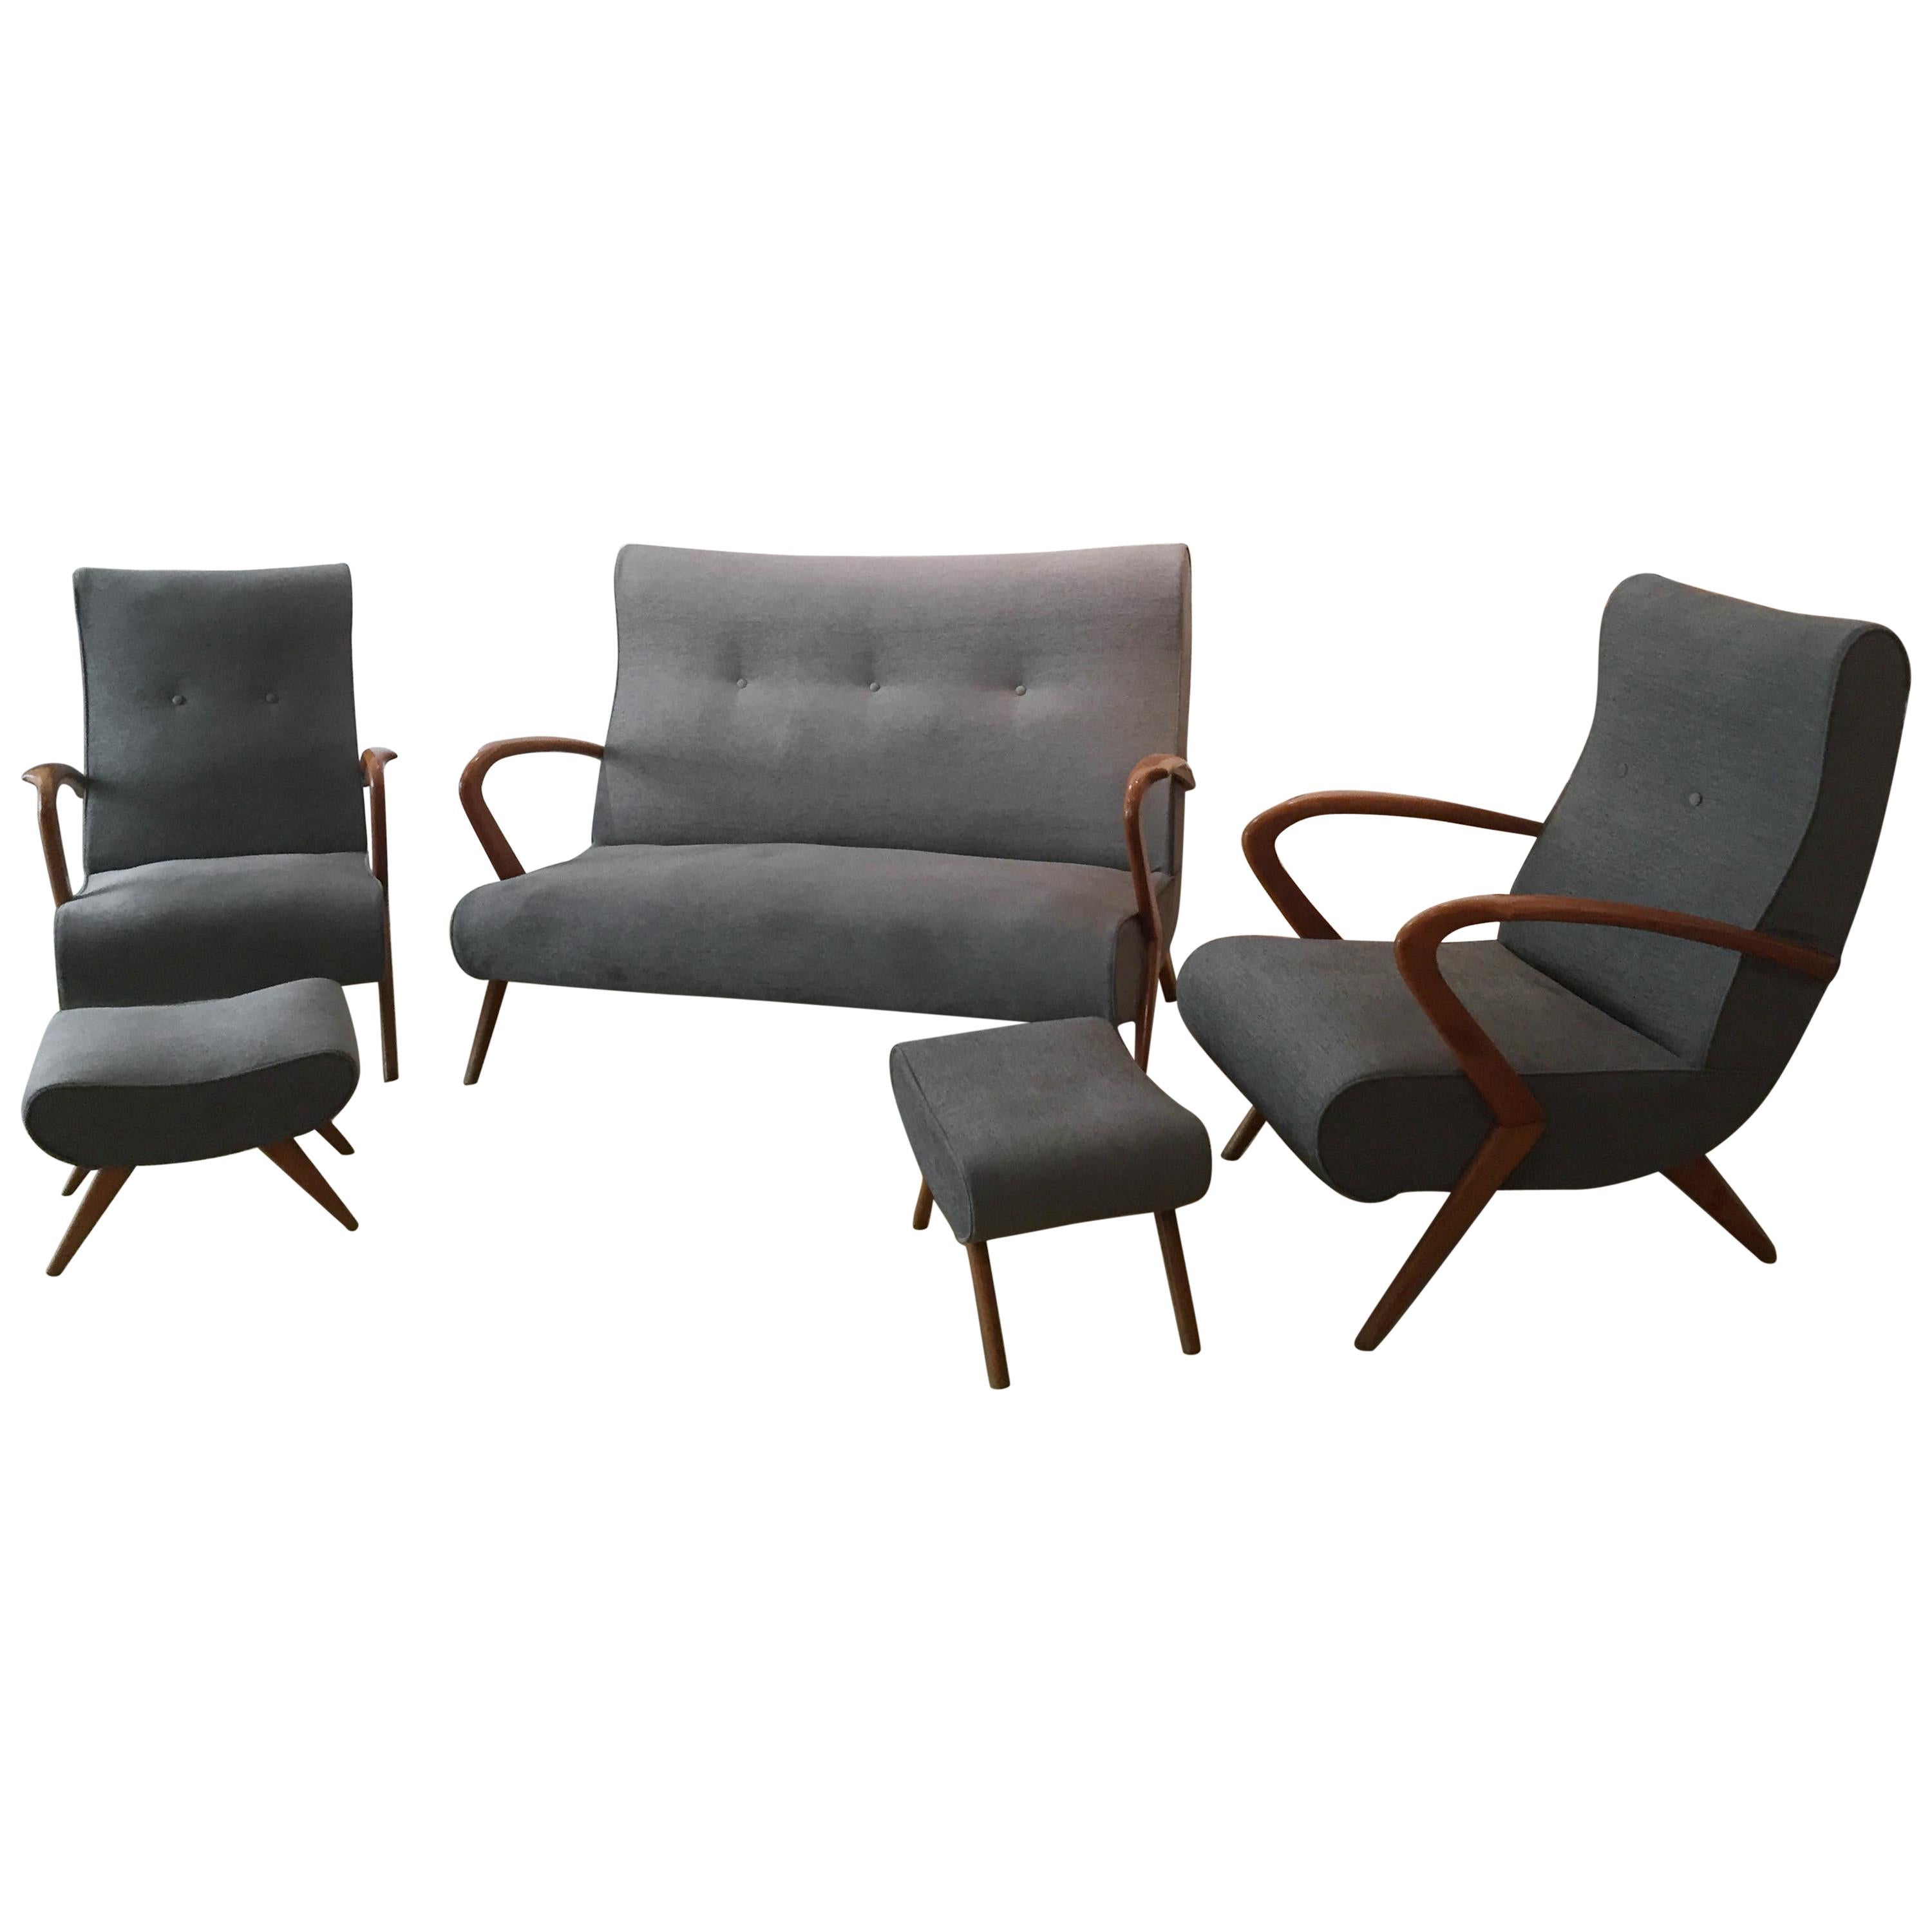 Living Room, 2 Grey Armchair Whit Footstools, 1 Grey Sofa, 1950, Italy For Sale